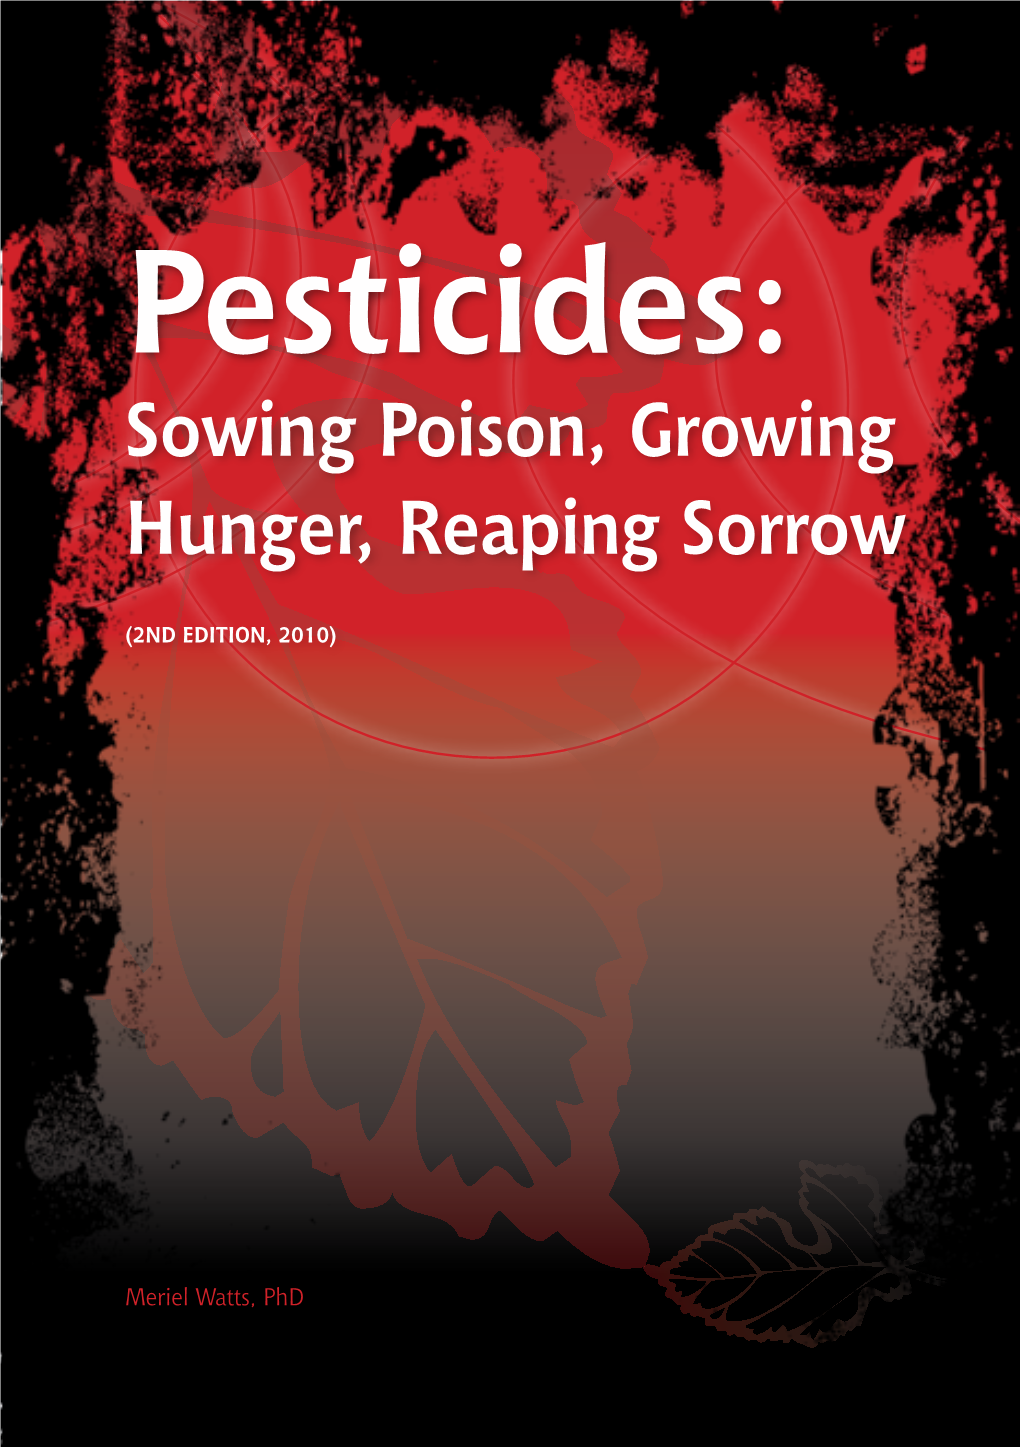 Pesticides: Sowing Poison, Growing Hunger, Reaping Sorrow